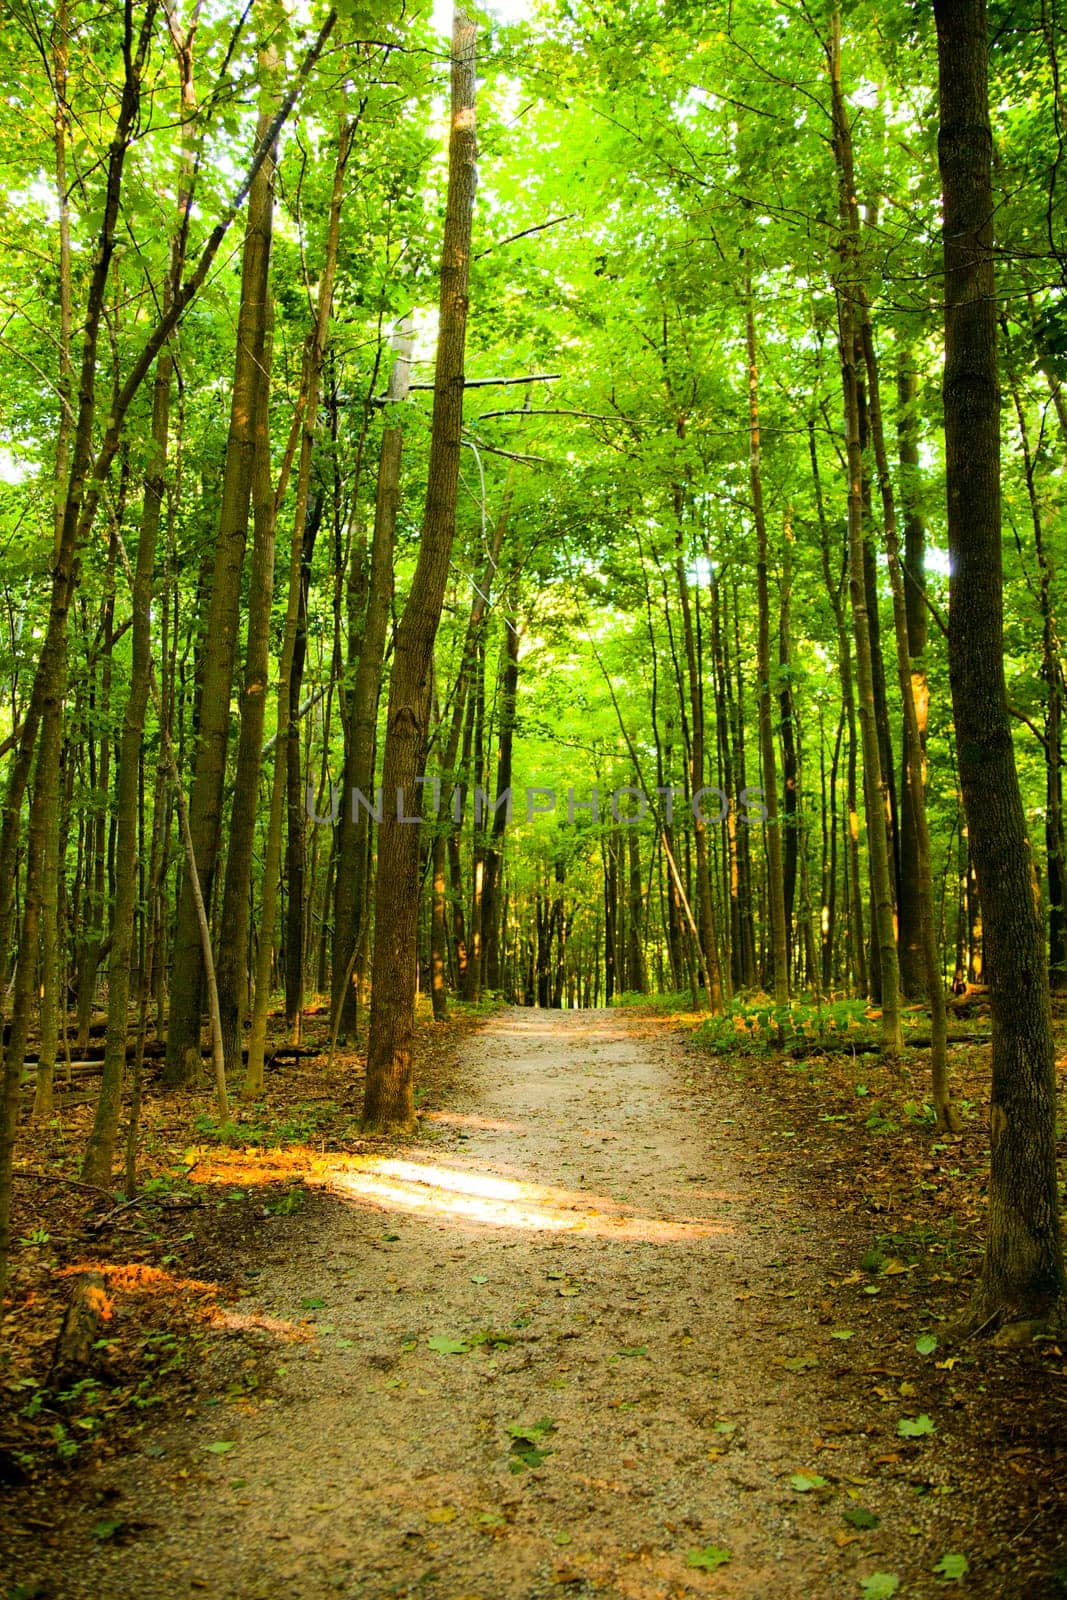 Escape into the enchanting beauty of Empire, Michigan's serene forest pathway, enveloped by towering trees and bathed in soft sunlight. A nature lover's paradise awaits, beckoning with tranquility and the allure of exploration.